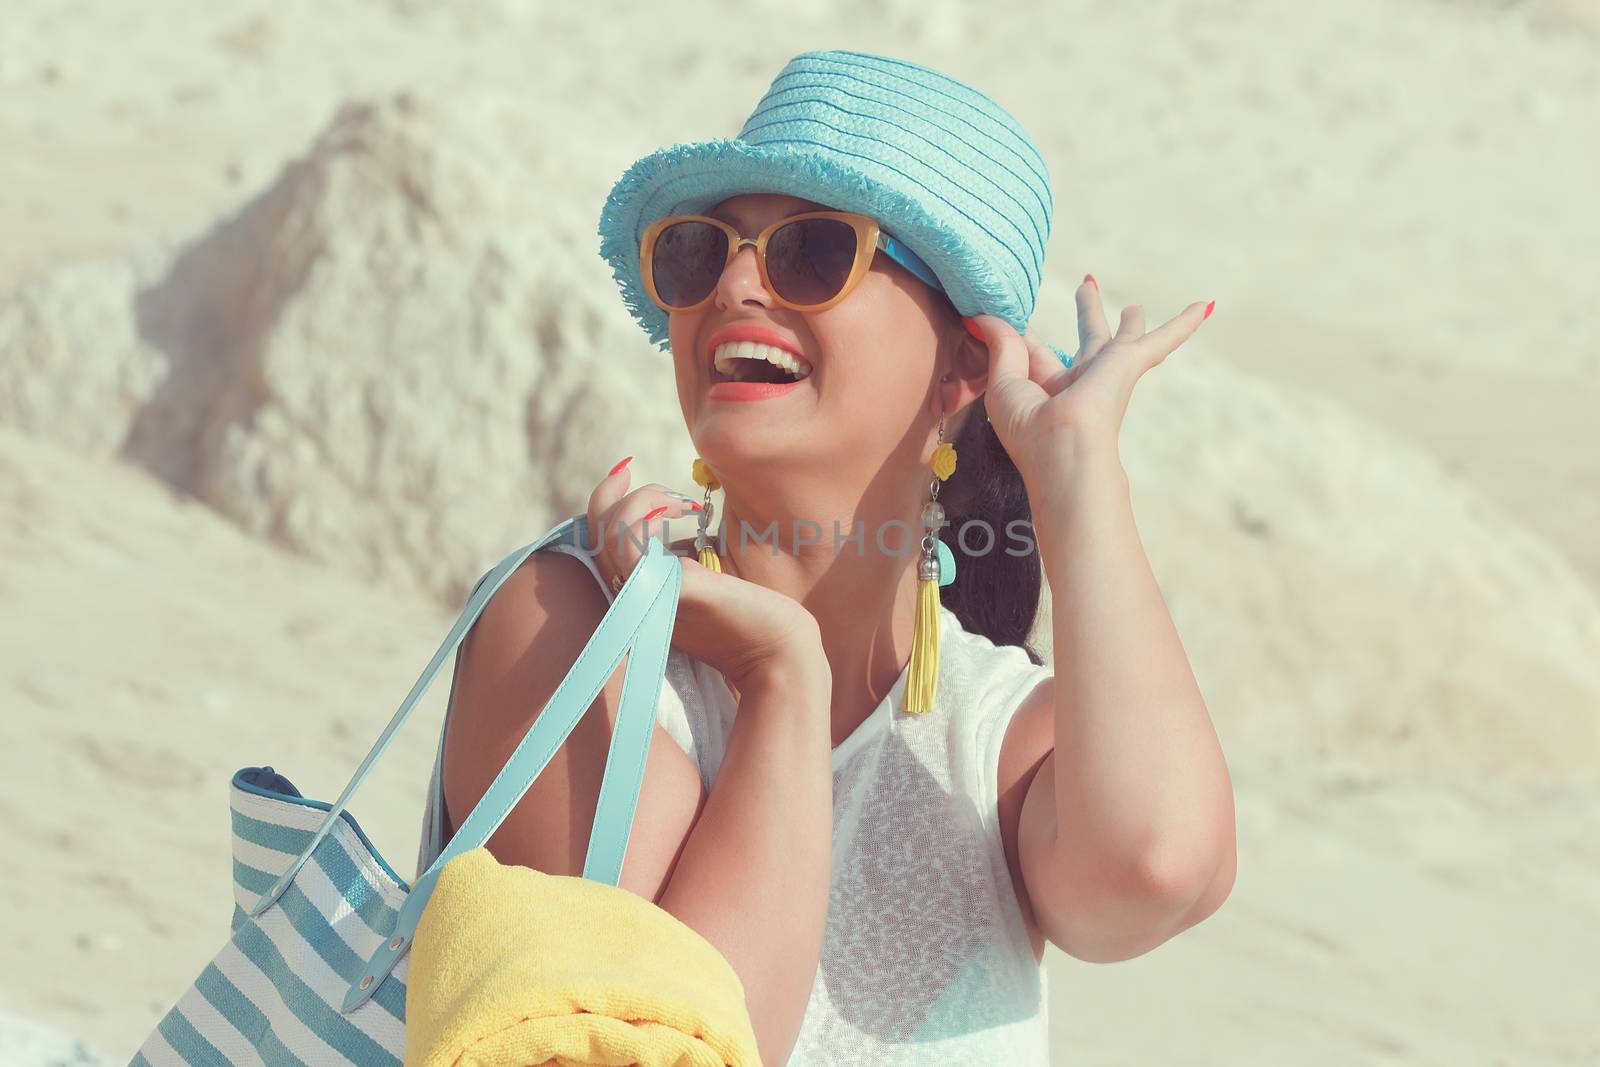 Beautiful woman smiling and carrying bag on the sandy beach. Summer vacation concept. Vintage style, selective focus